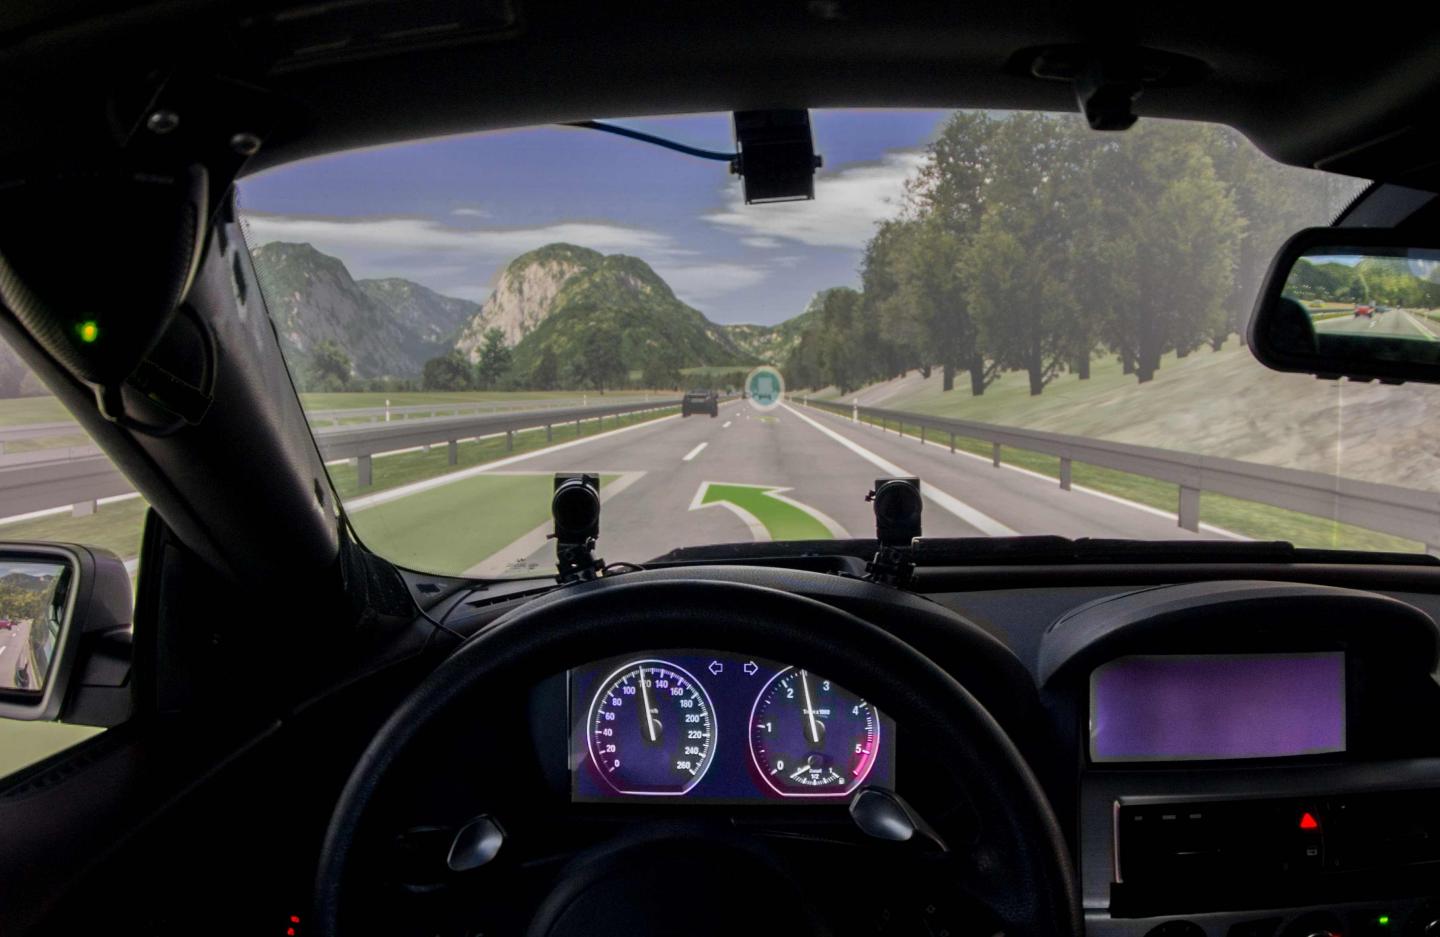 Is the Driver Ready to Take Over the Steering Wheel? By Means of Cameras and Sensors, Autonomous Sys